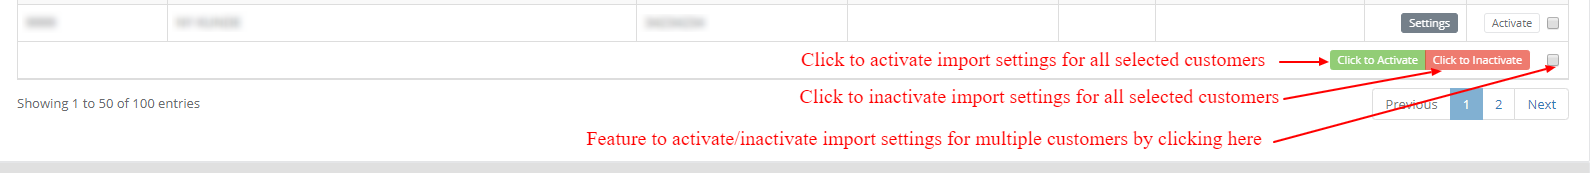 Import Rules - Activation of multiple customers